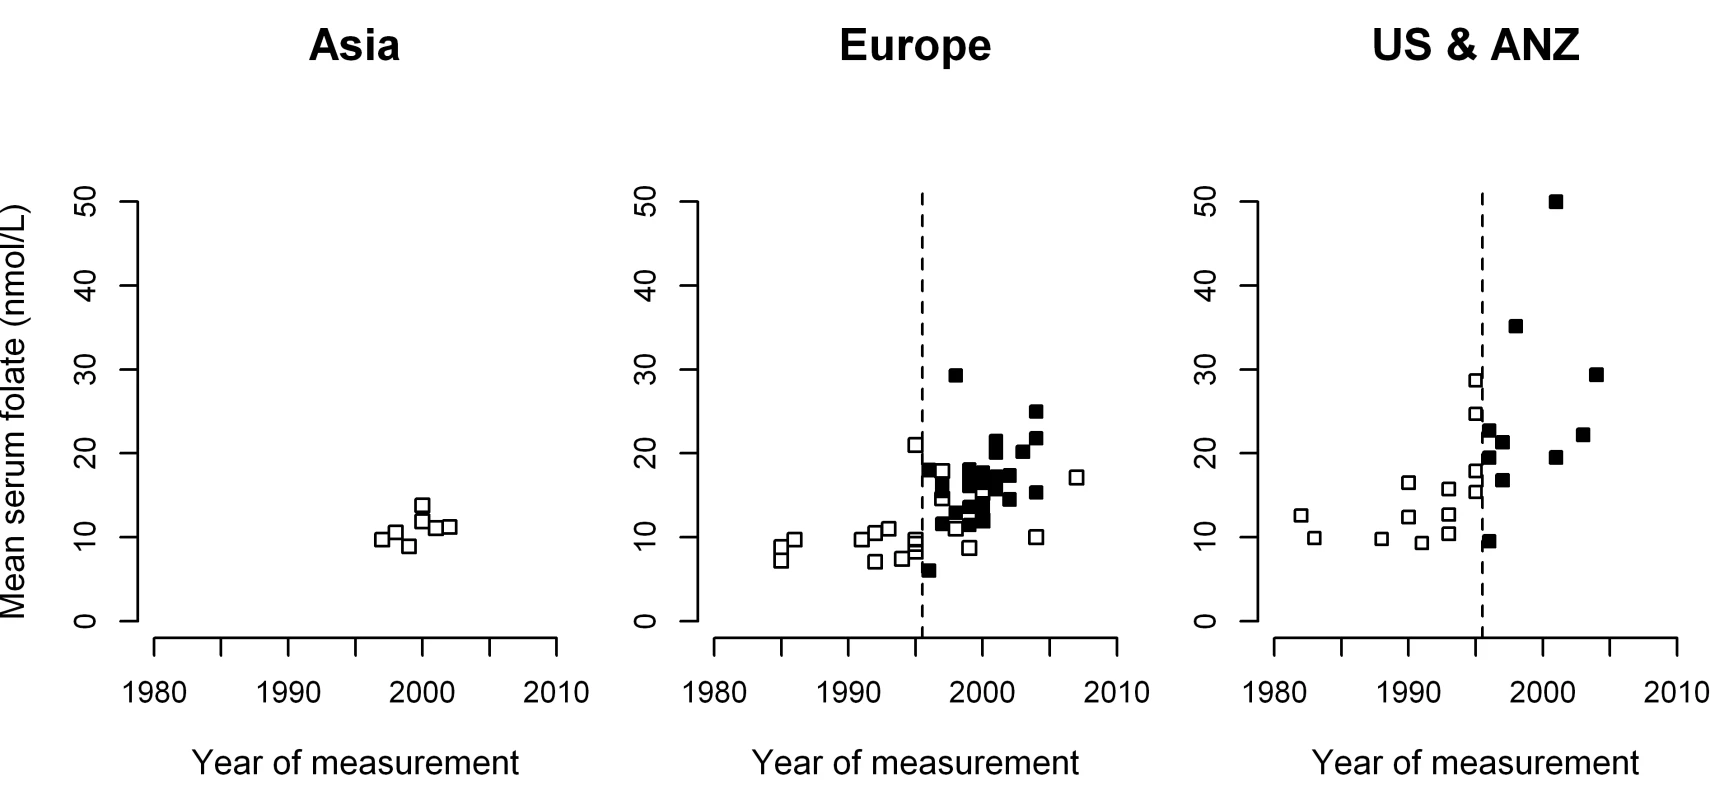 Mean serum folate concentrations in 81 population surveys, by calendar year and region.